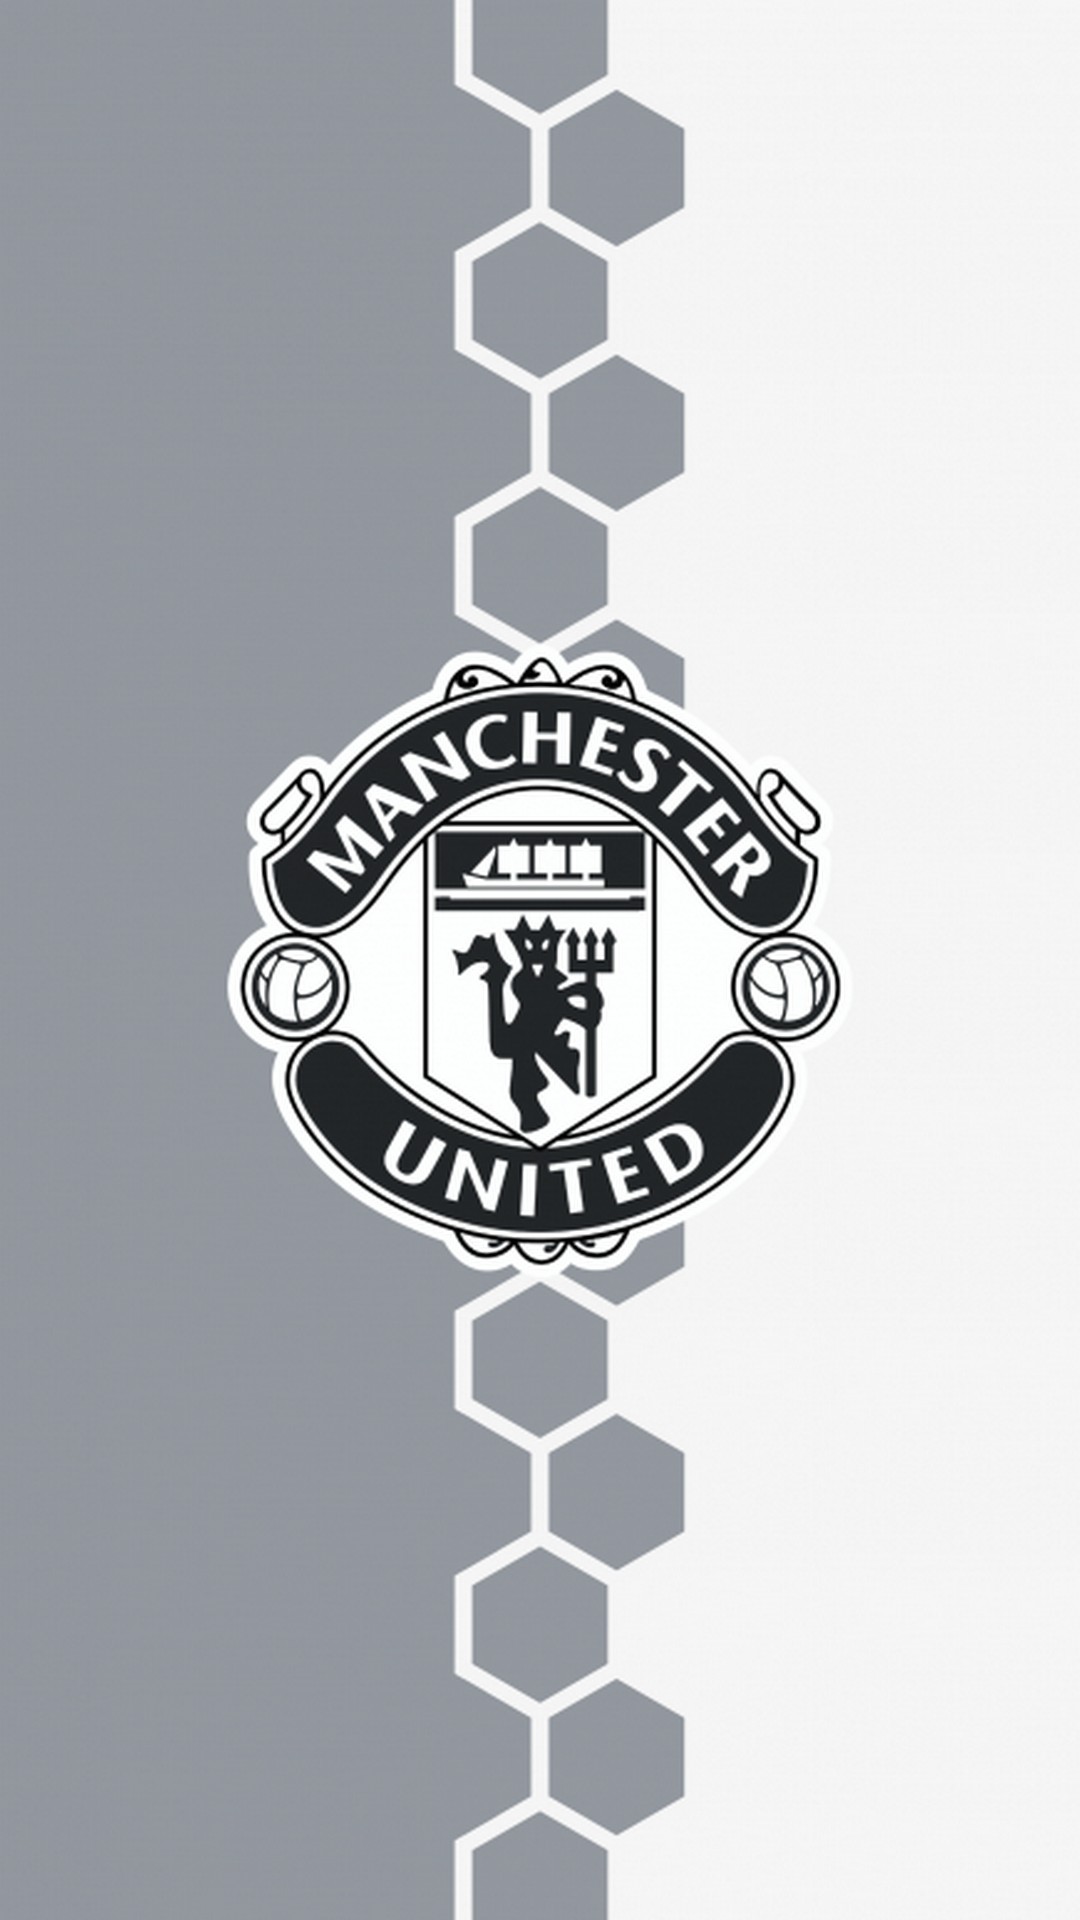 42 Manchester United 2021 Wallpapers On Wallpapersafari